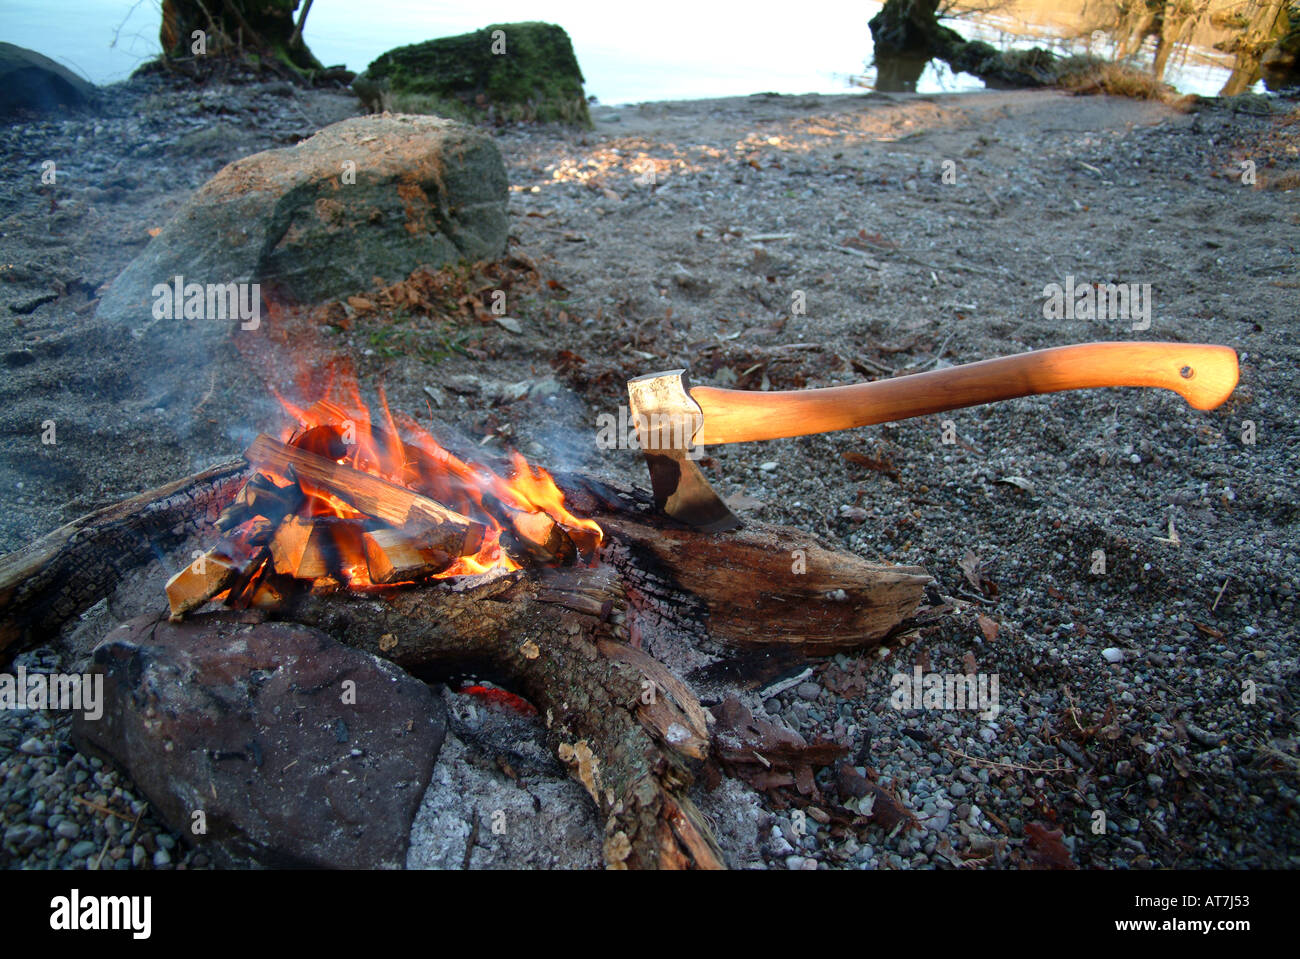 Fire with wood split with axe Stock Photo